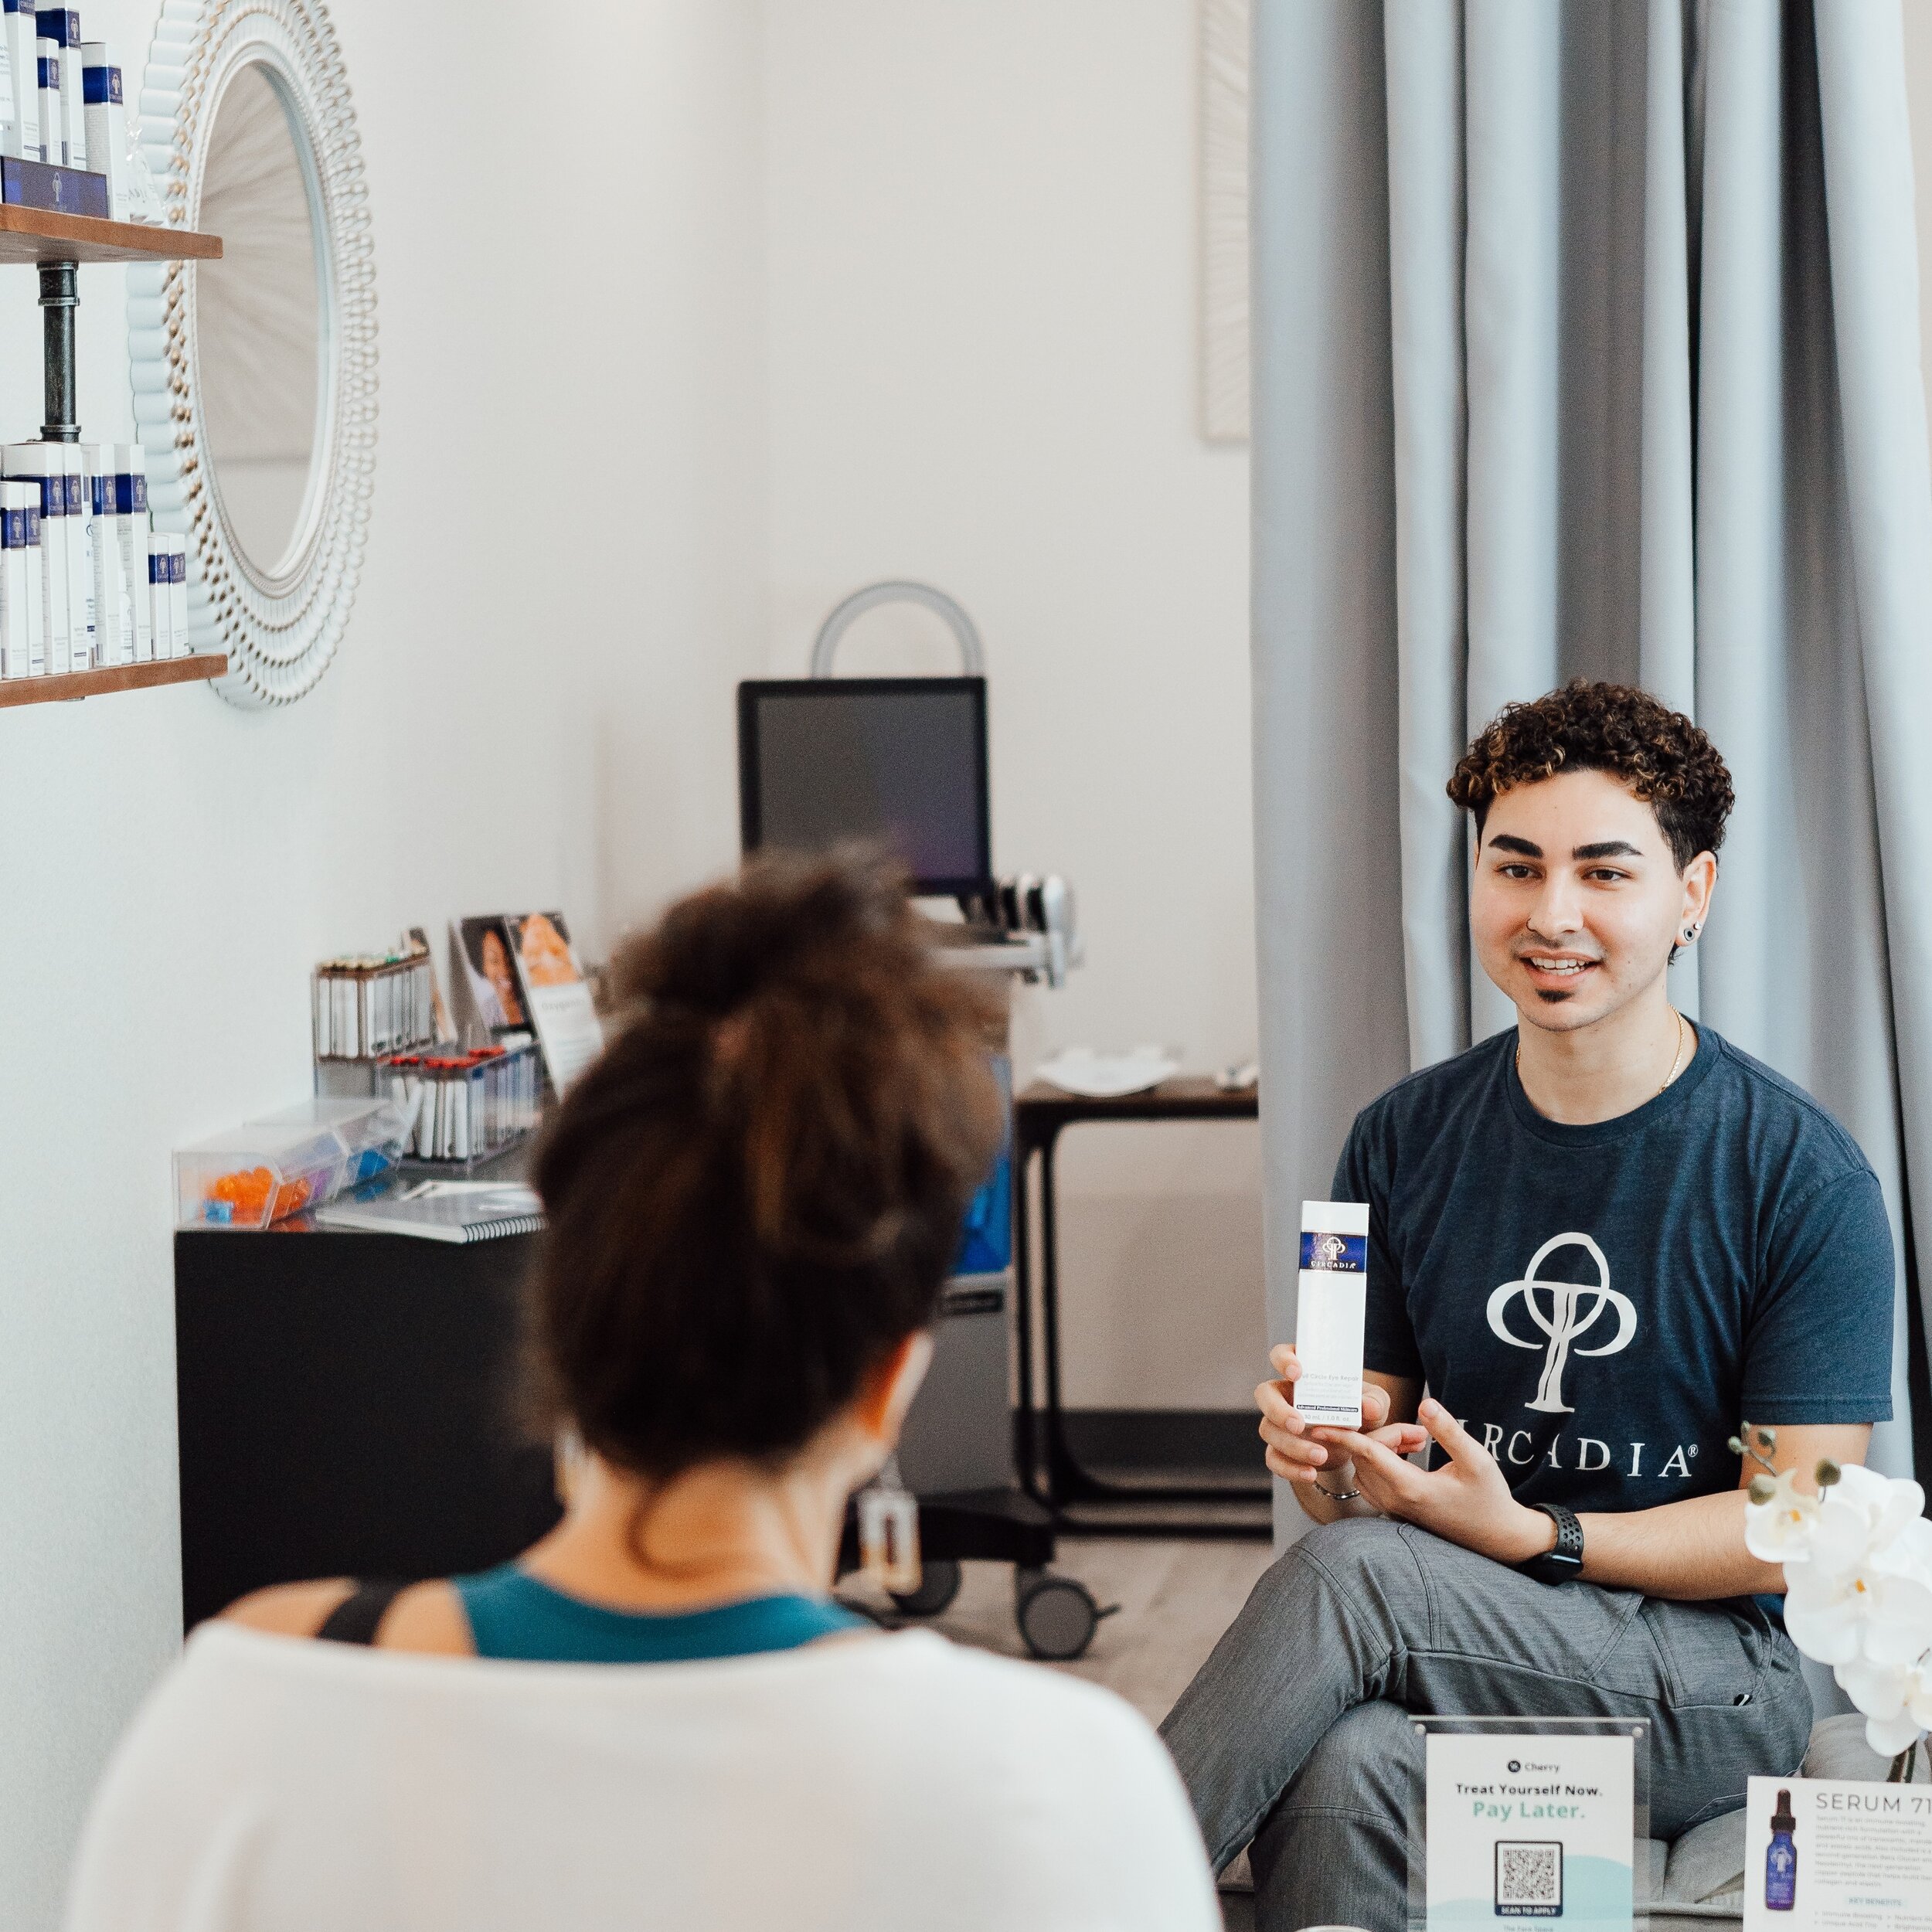 Full consultations and tailored skincare routine recommendations are included in EVERY treatment at The Face Space! We go over how your skin is performing, if you had any lifestyle changes, product usage and routine discipline. Everything is then adj